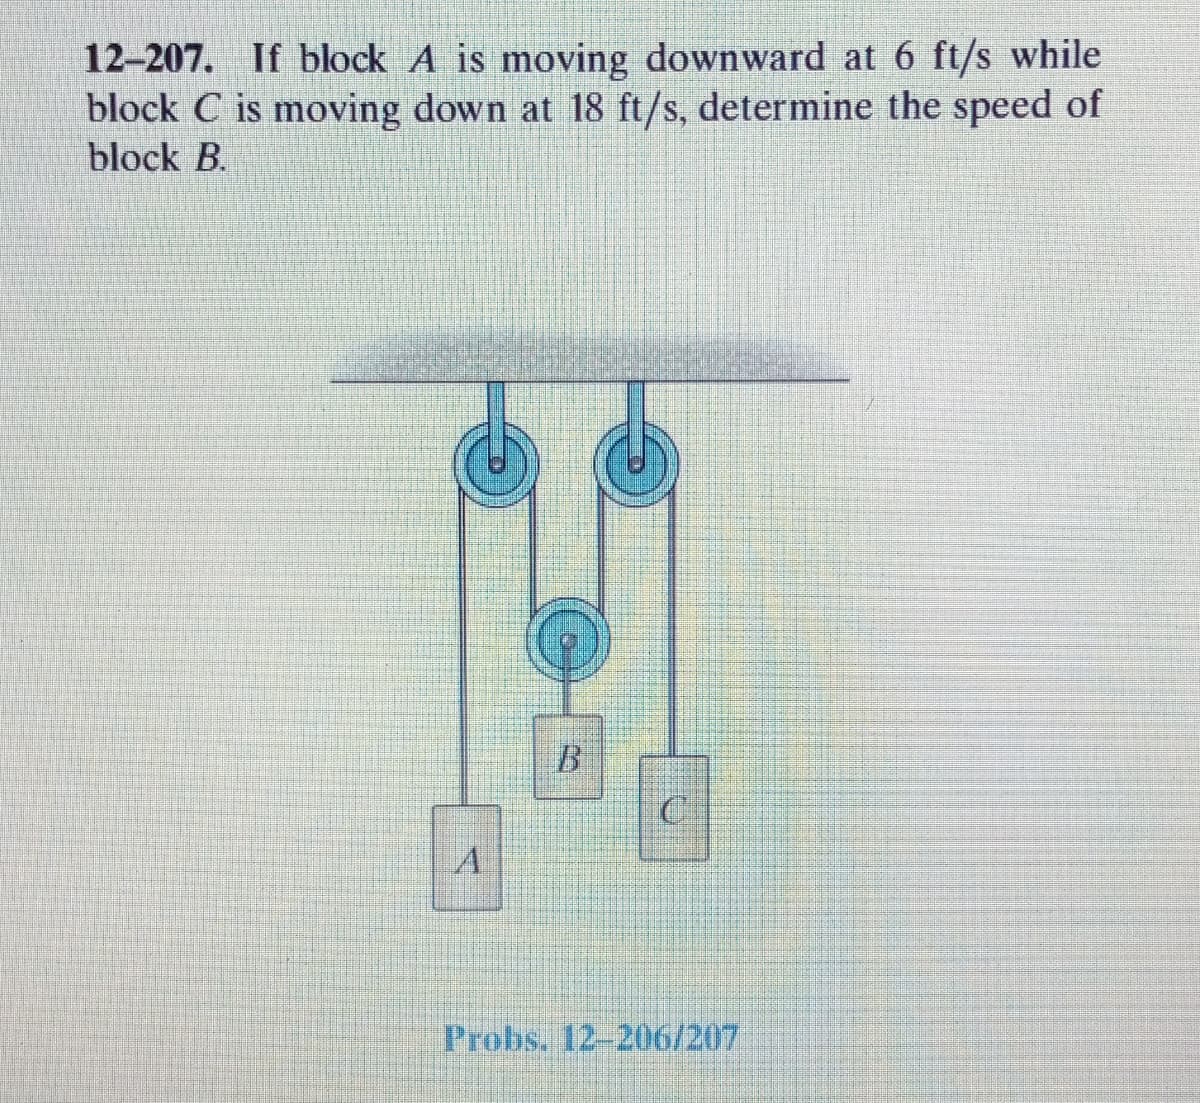 12-207. If block A is moving downward at 6 ft/s while
block C is moving down at 18 ft/s, determine the speed of
block B.
A
Probs. 12-206/207
